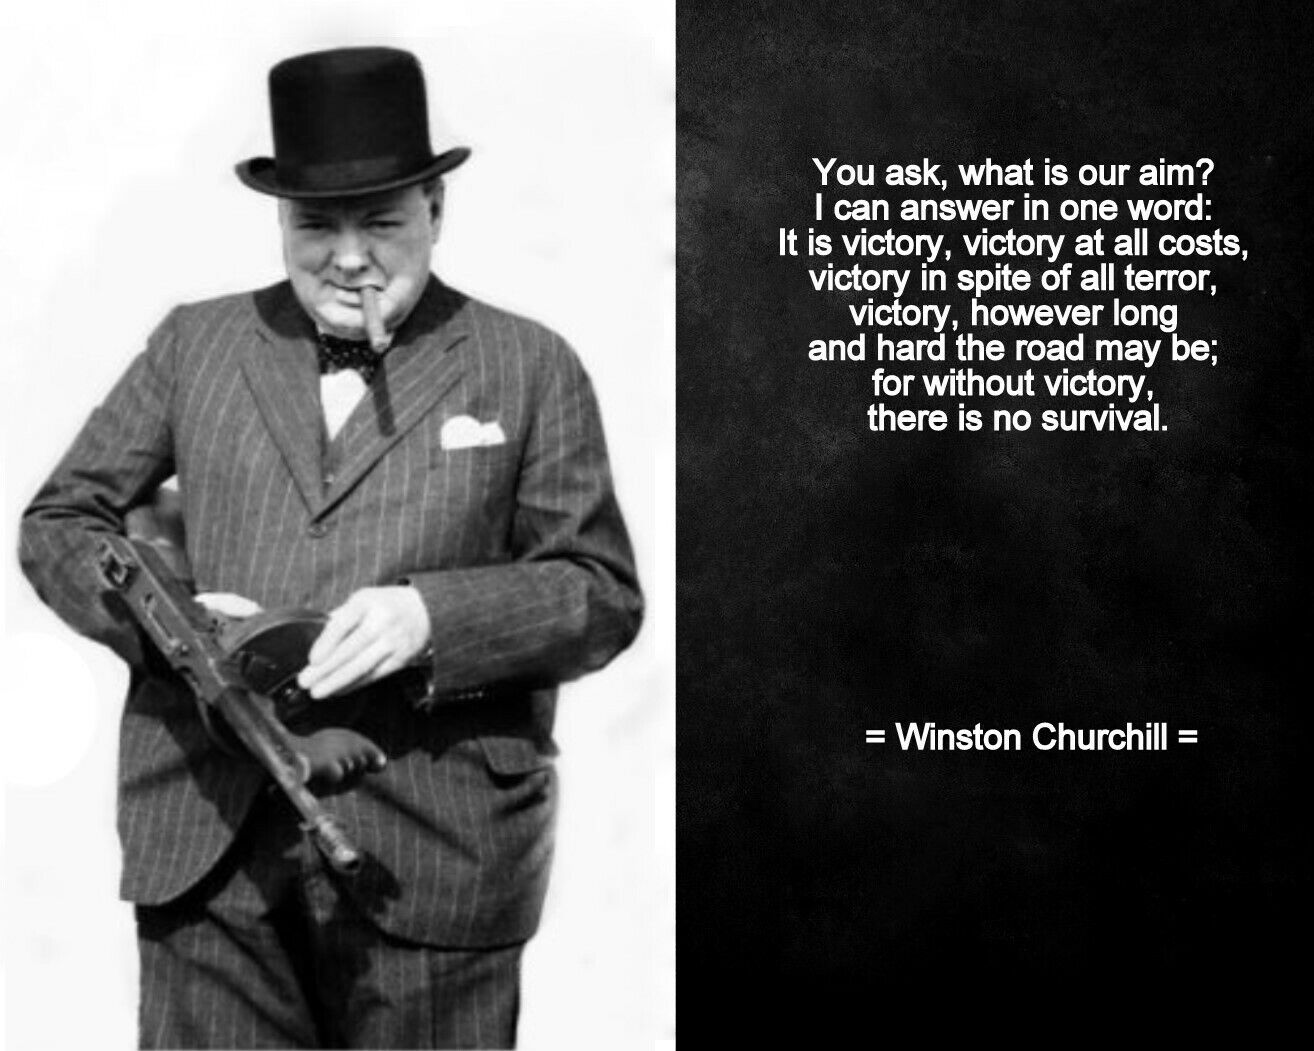 WINSTON CHURCHILL QUOTE PHOTO PRINT YOU ASK, WHAT IS OUR AIM?...VICTORY